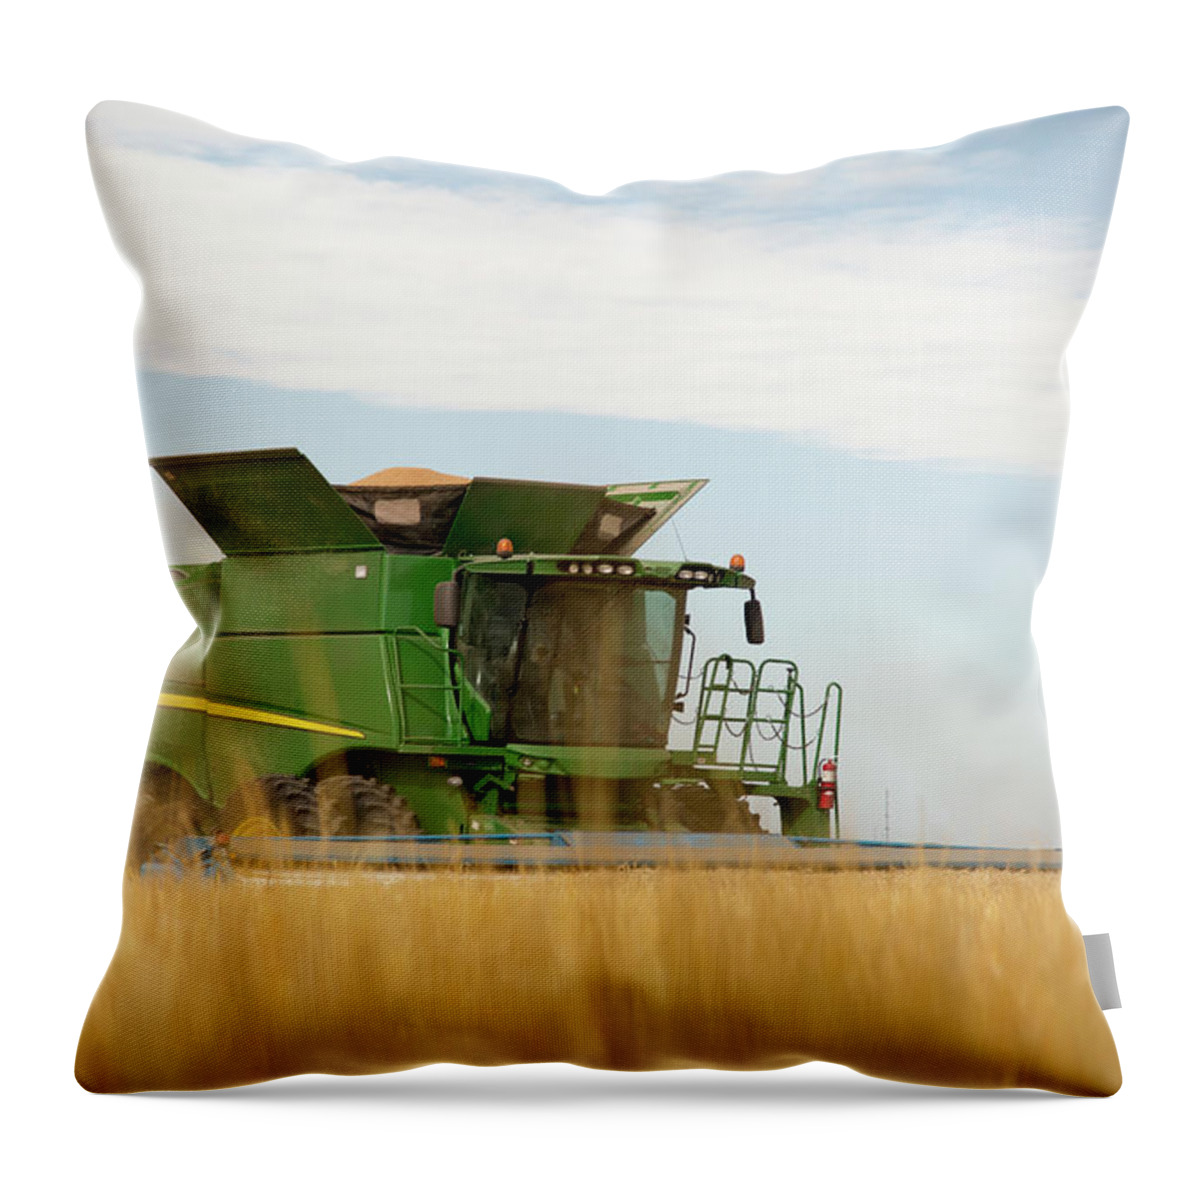 Combine Throw Pillow featuring the photograph Combine Cuts Wheat In Northeast by Kevan Dee